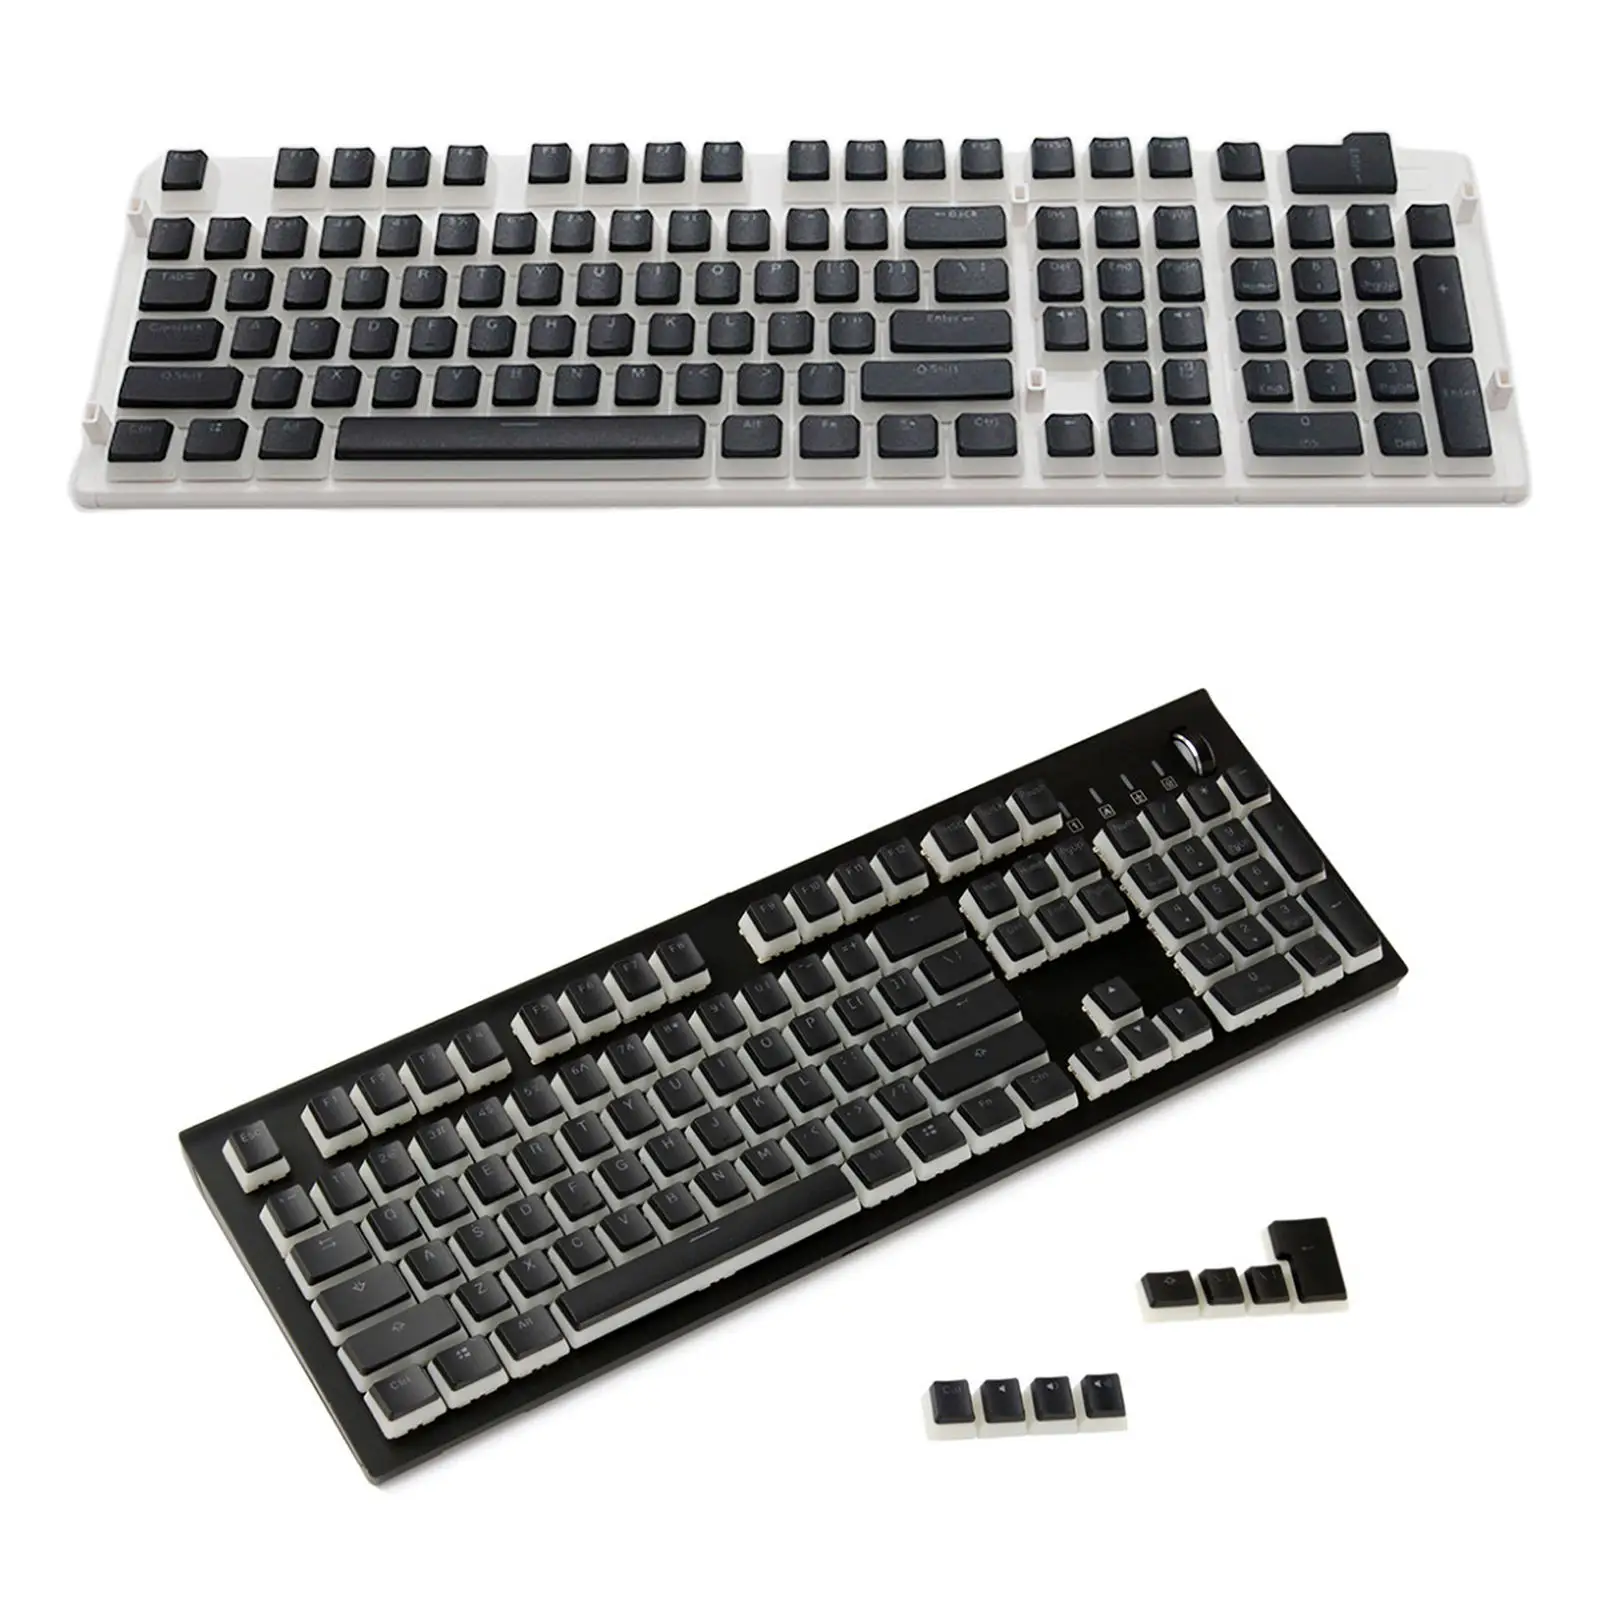 tro væv At accelerere 108 Keys Caps Double Shot Pbt Pudding Keycaps Backlit Compatible With  Cherry Mx Mechanical Keyboard Backlit Pbt Pudding Keycaps - Keyboards -  AliExpress